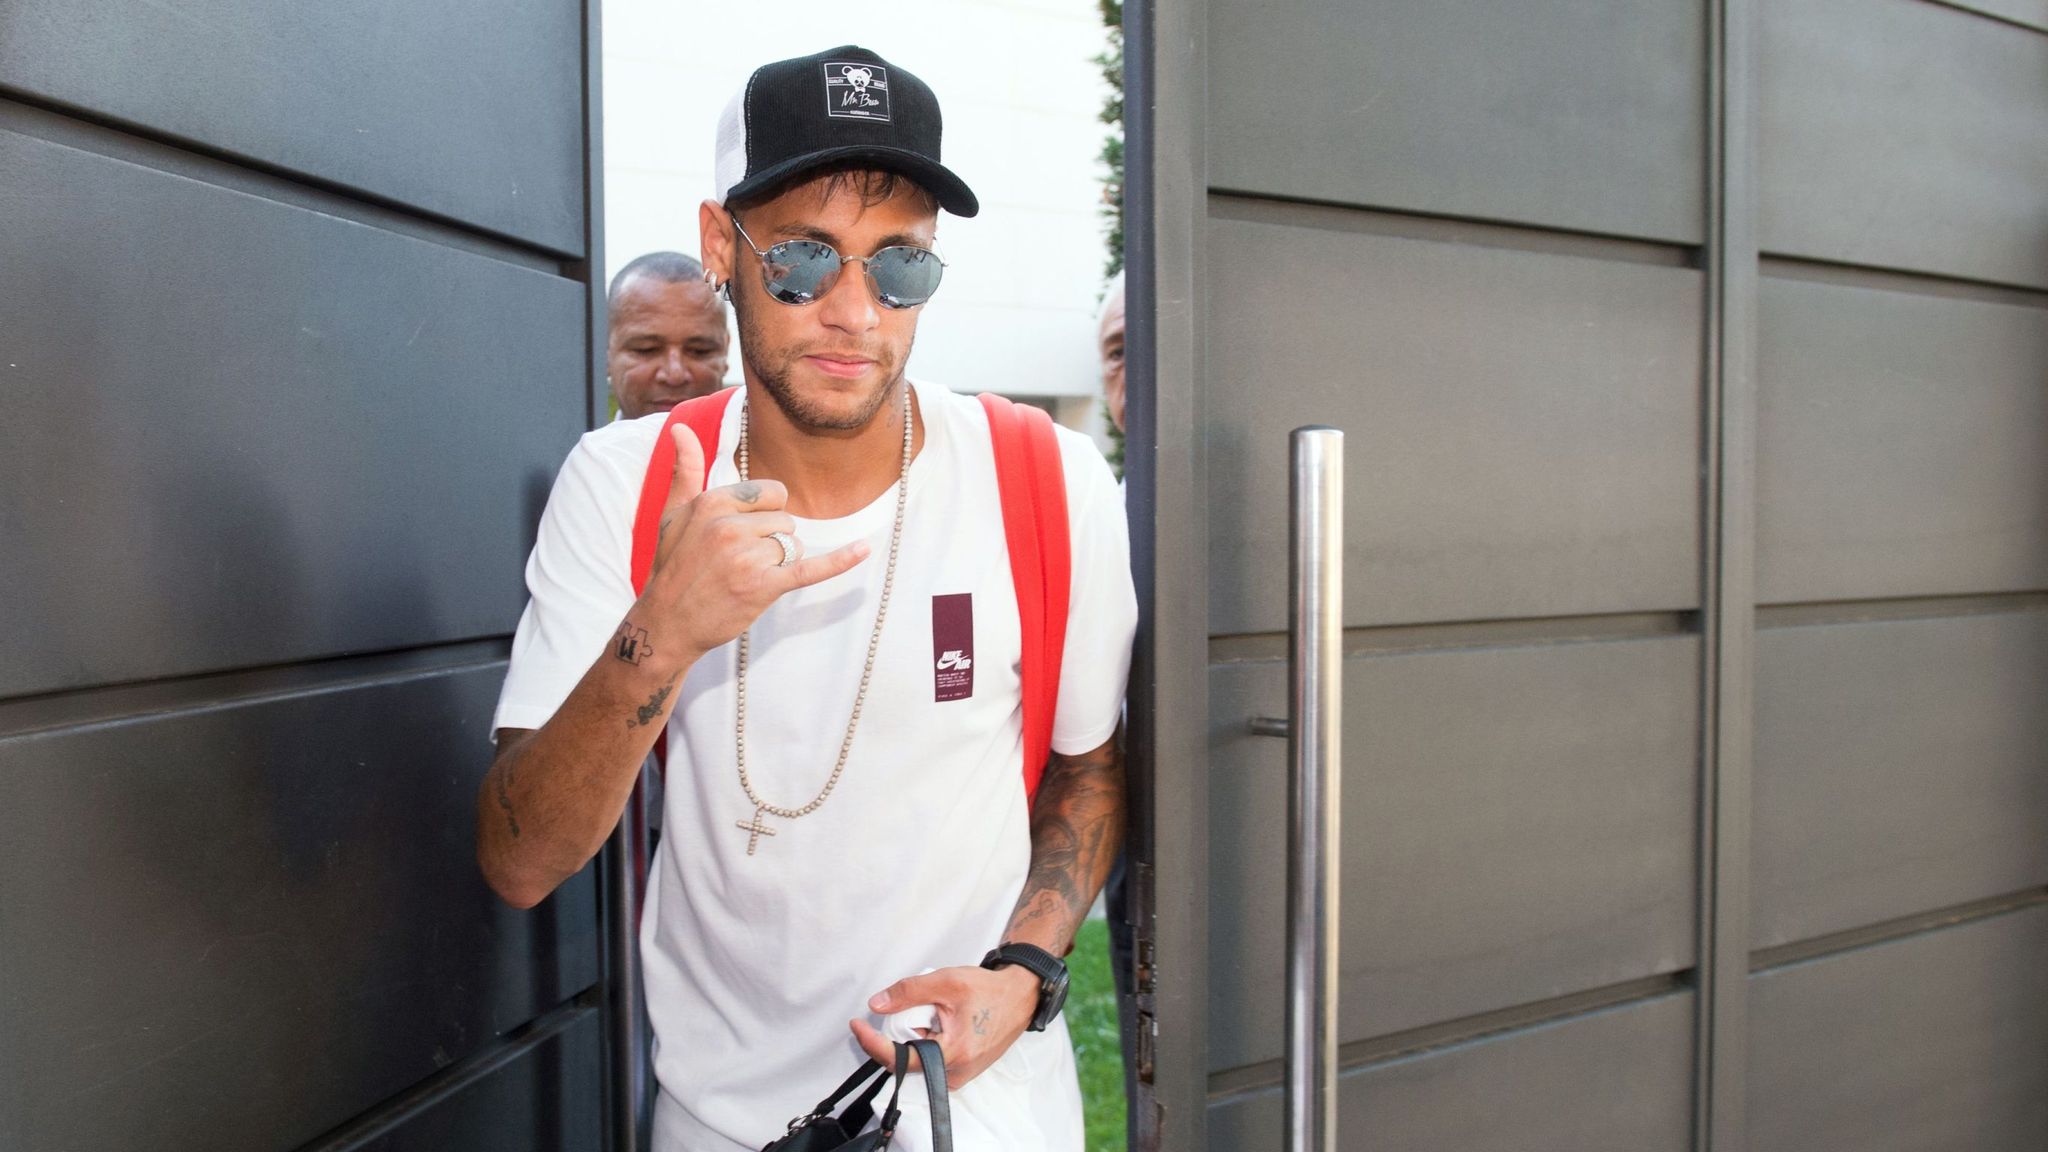 Neymar touches down in Paris following world-record transfer from